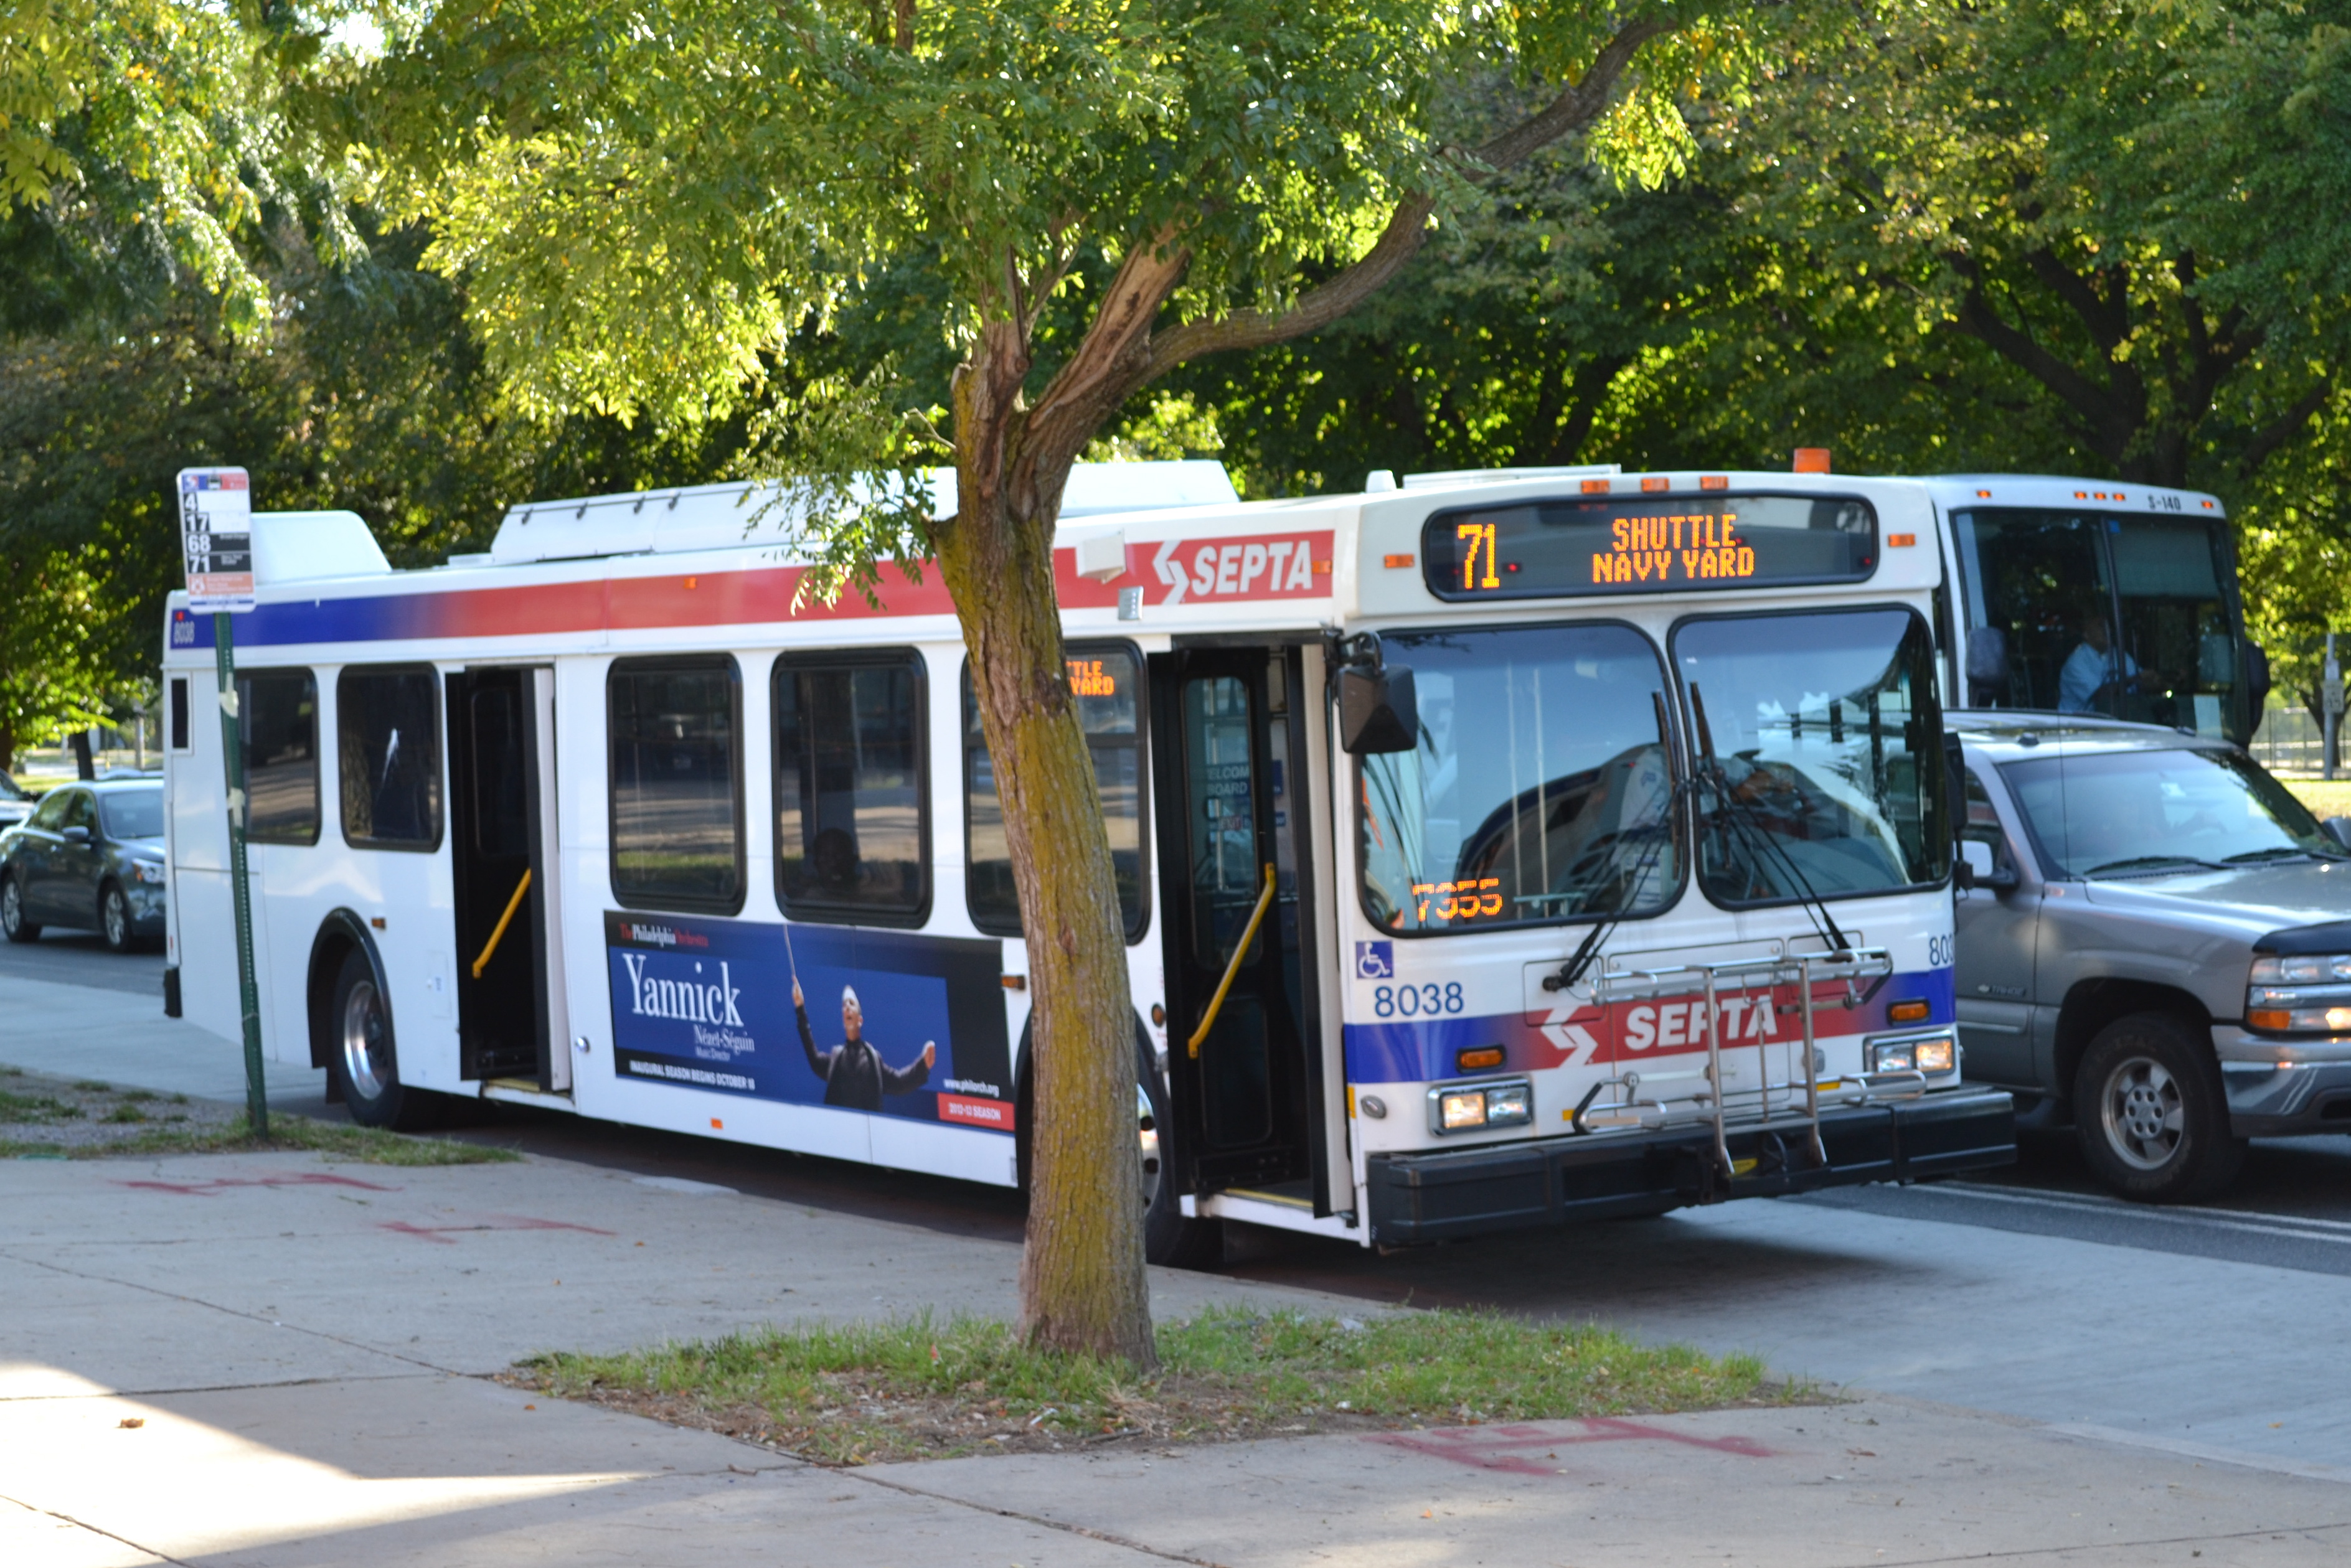 SEPTA will discontinue its Route 71 shuttle service November 30